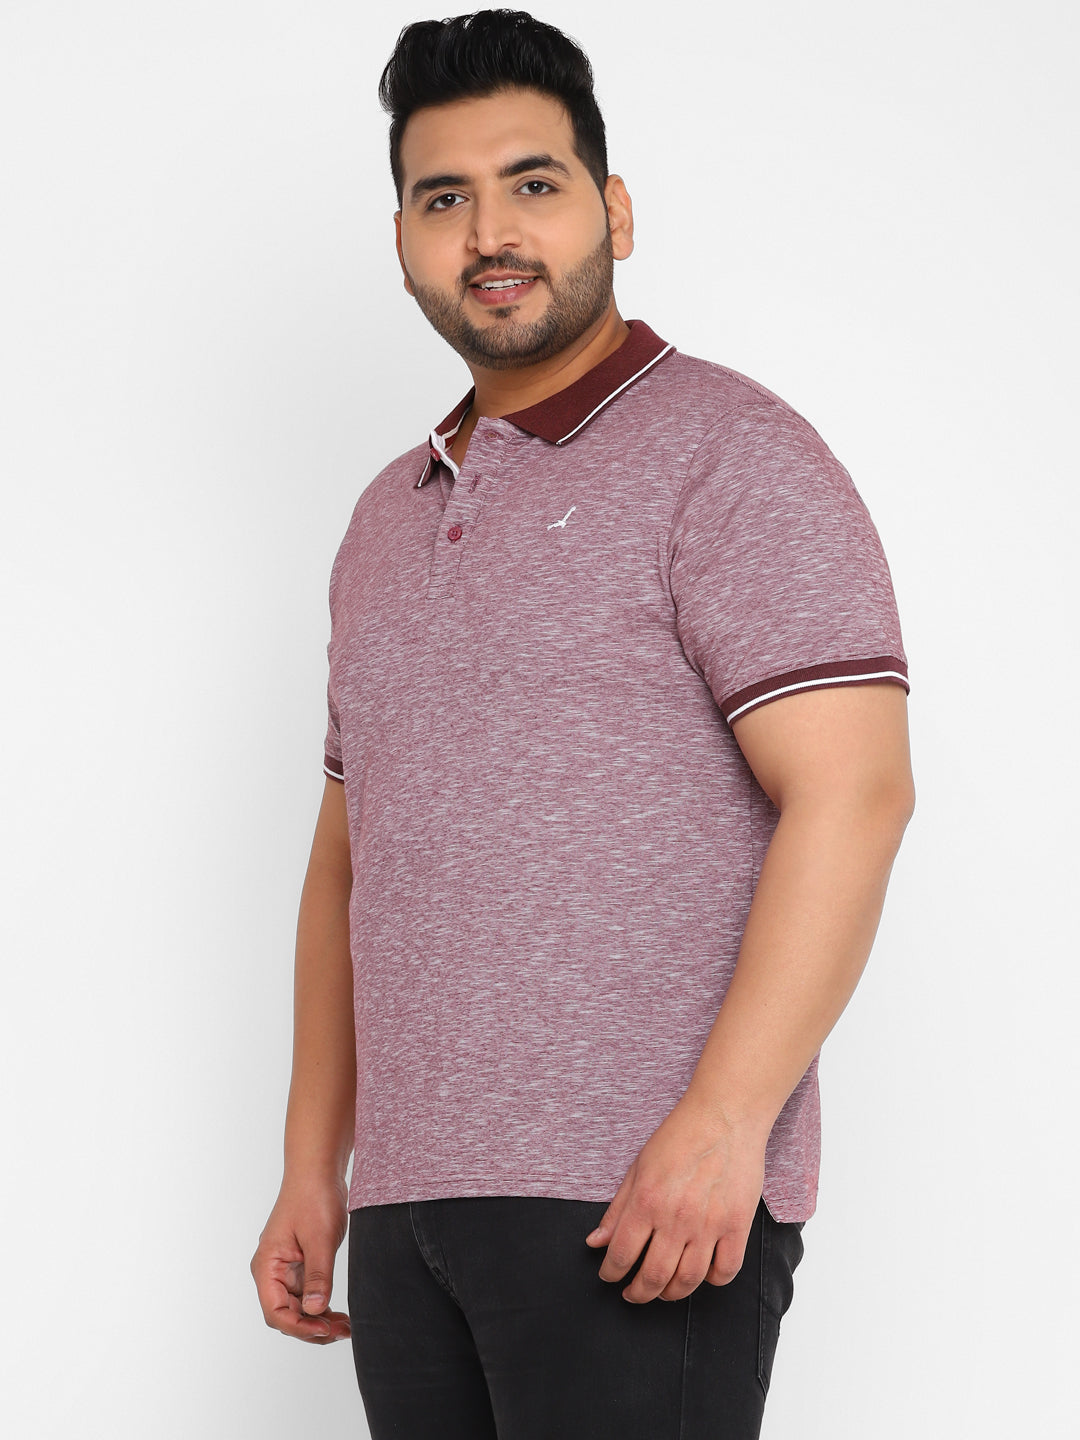 Polo Half Sleeves T-Shirt for Men - Maroon